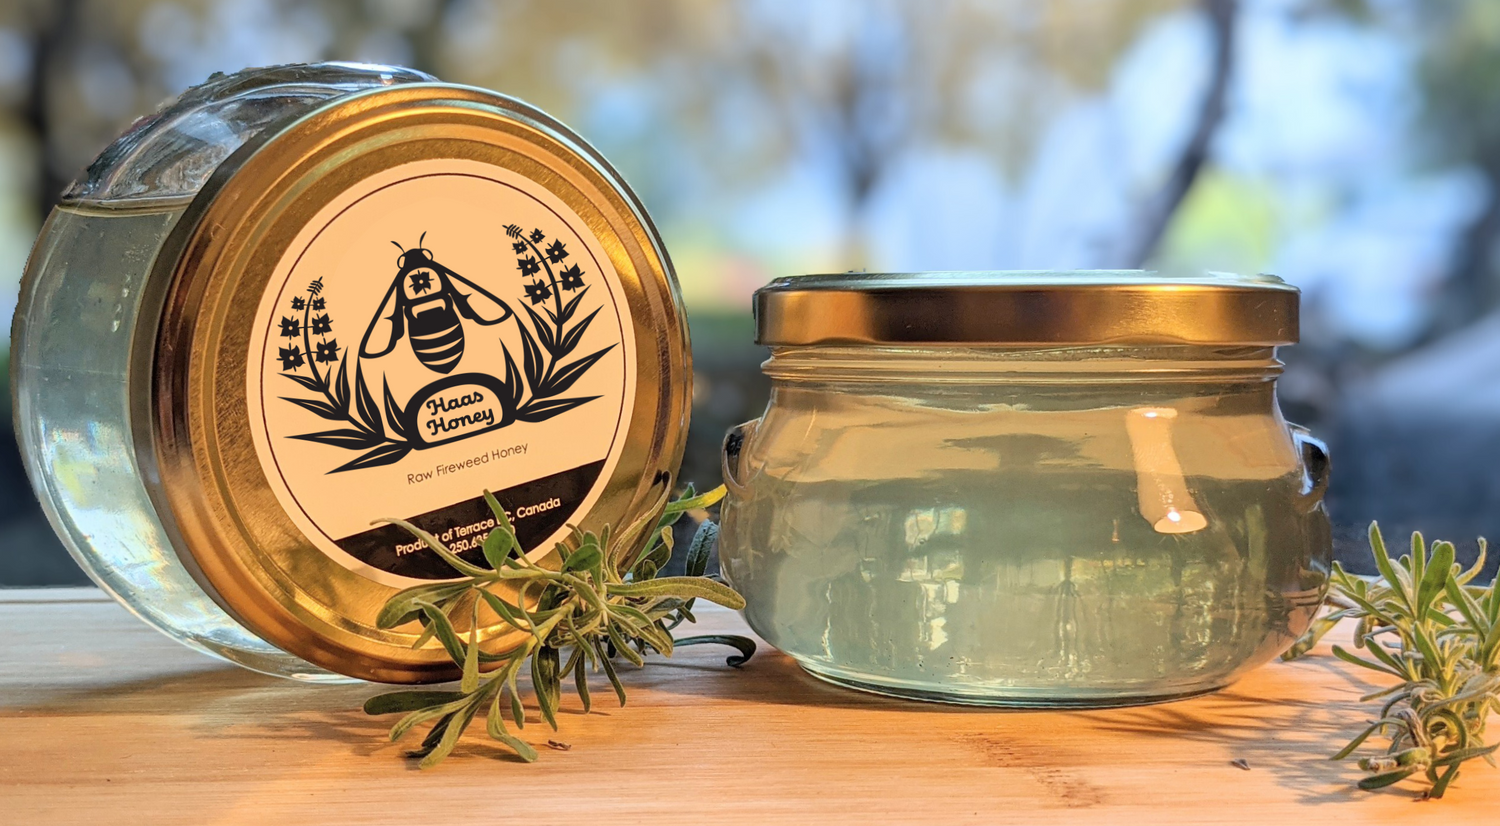 Two jars of honey that are pale yellow in colour. One jar is on it's side and has a black and white logo of a west coast indigenous style honey bee and fireweed plant. Text on the label reads: Haas Honey, Raw Fireweed Honey. Terrace BC 250-635-9020